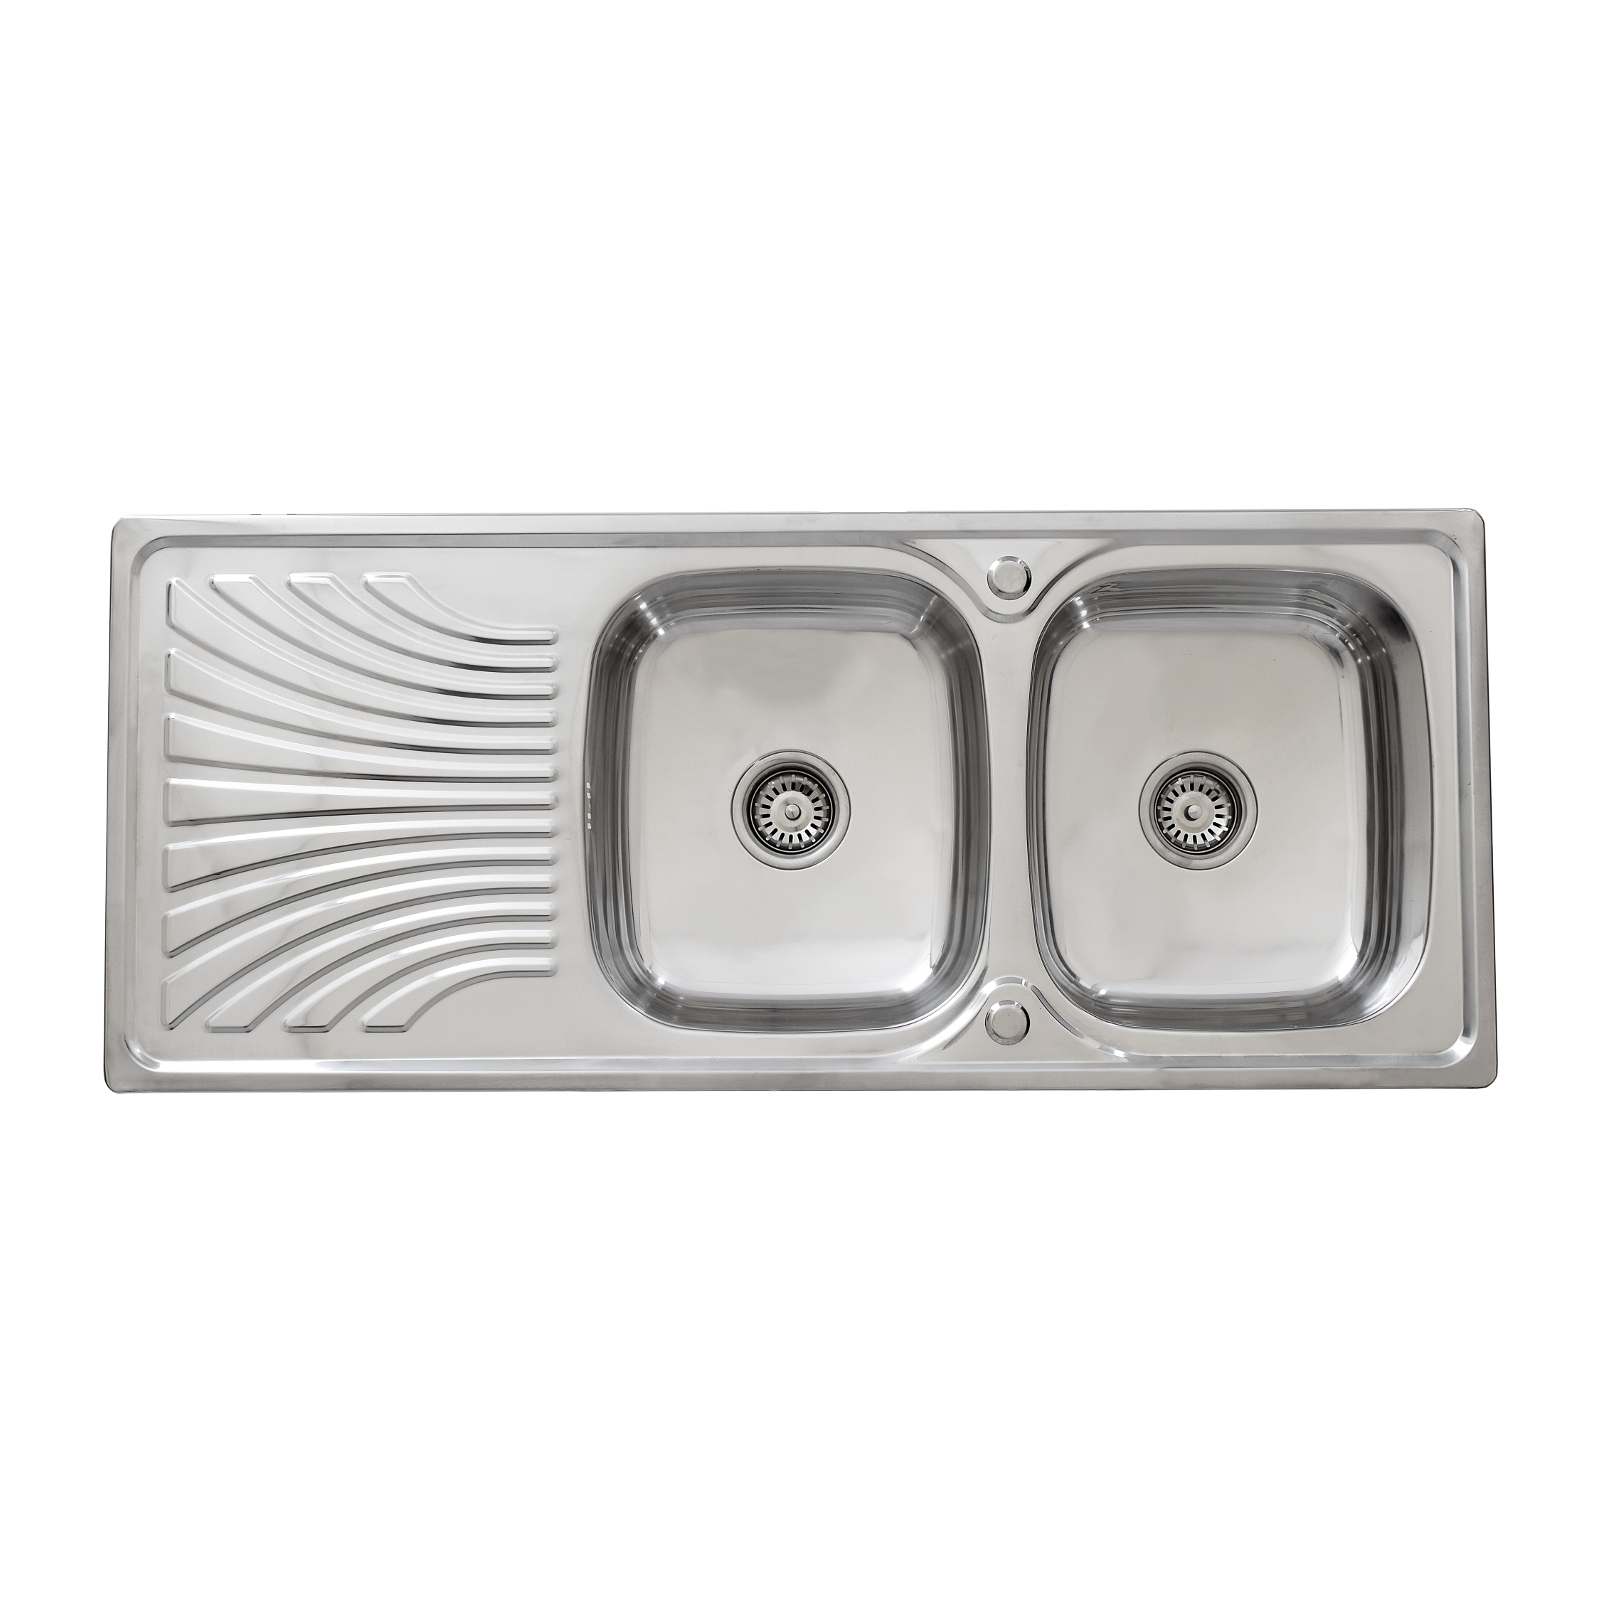 Stainless Steel Sink With Drainboard   VisualHunt